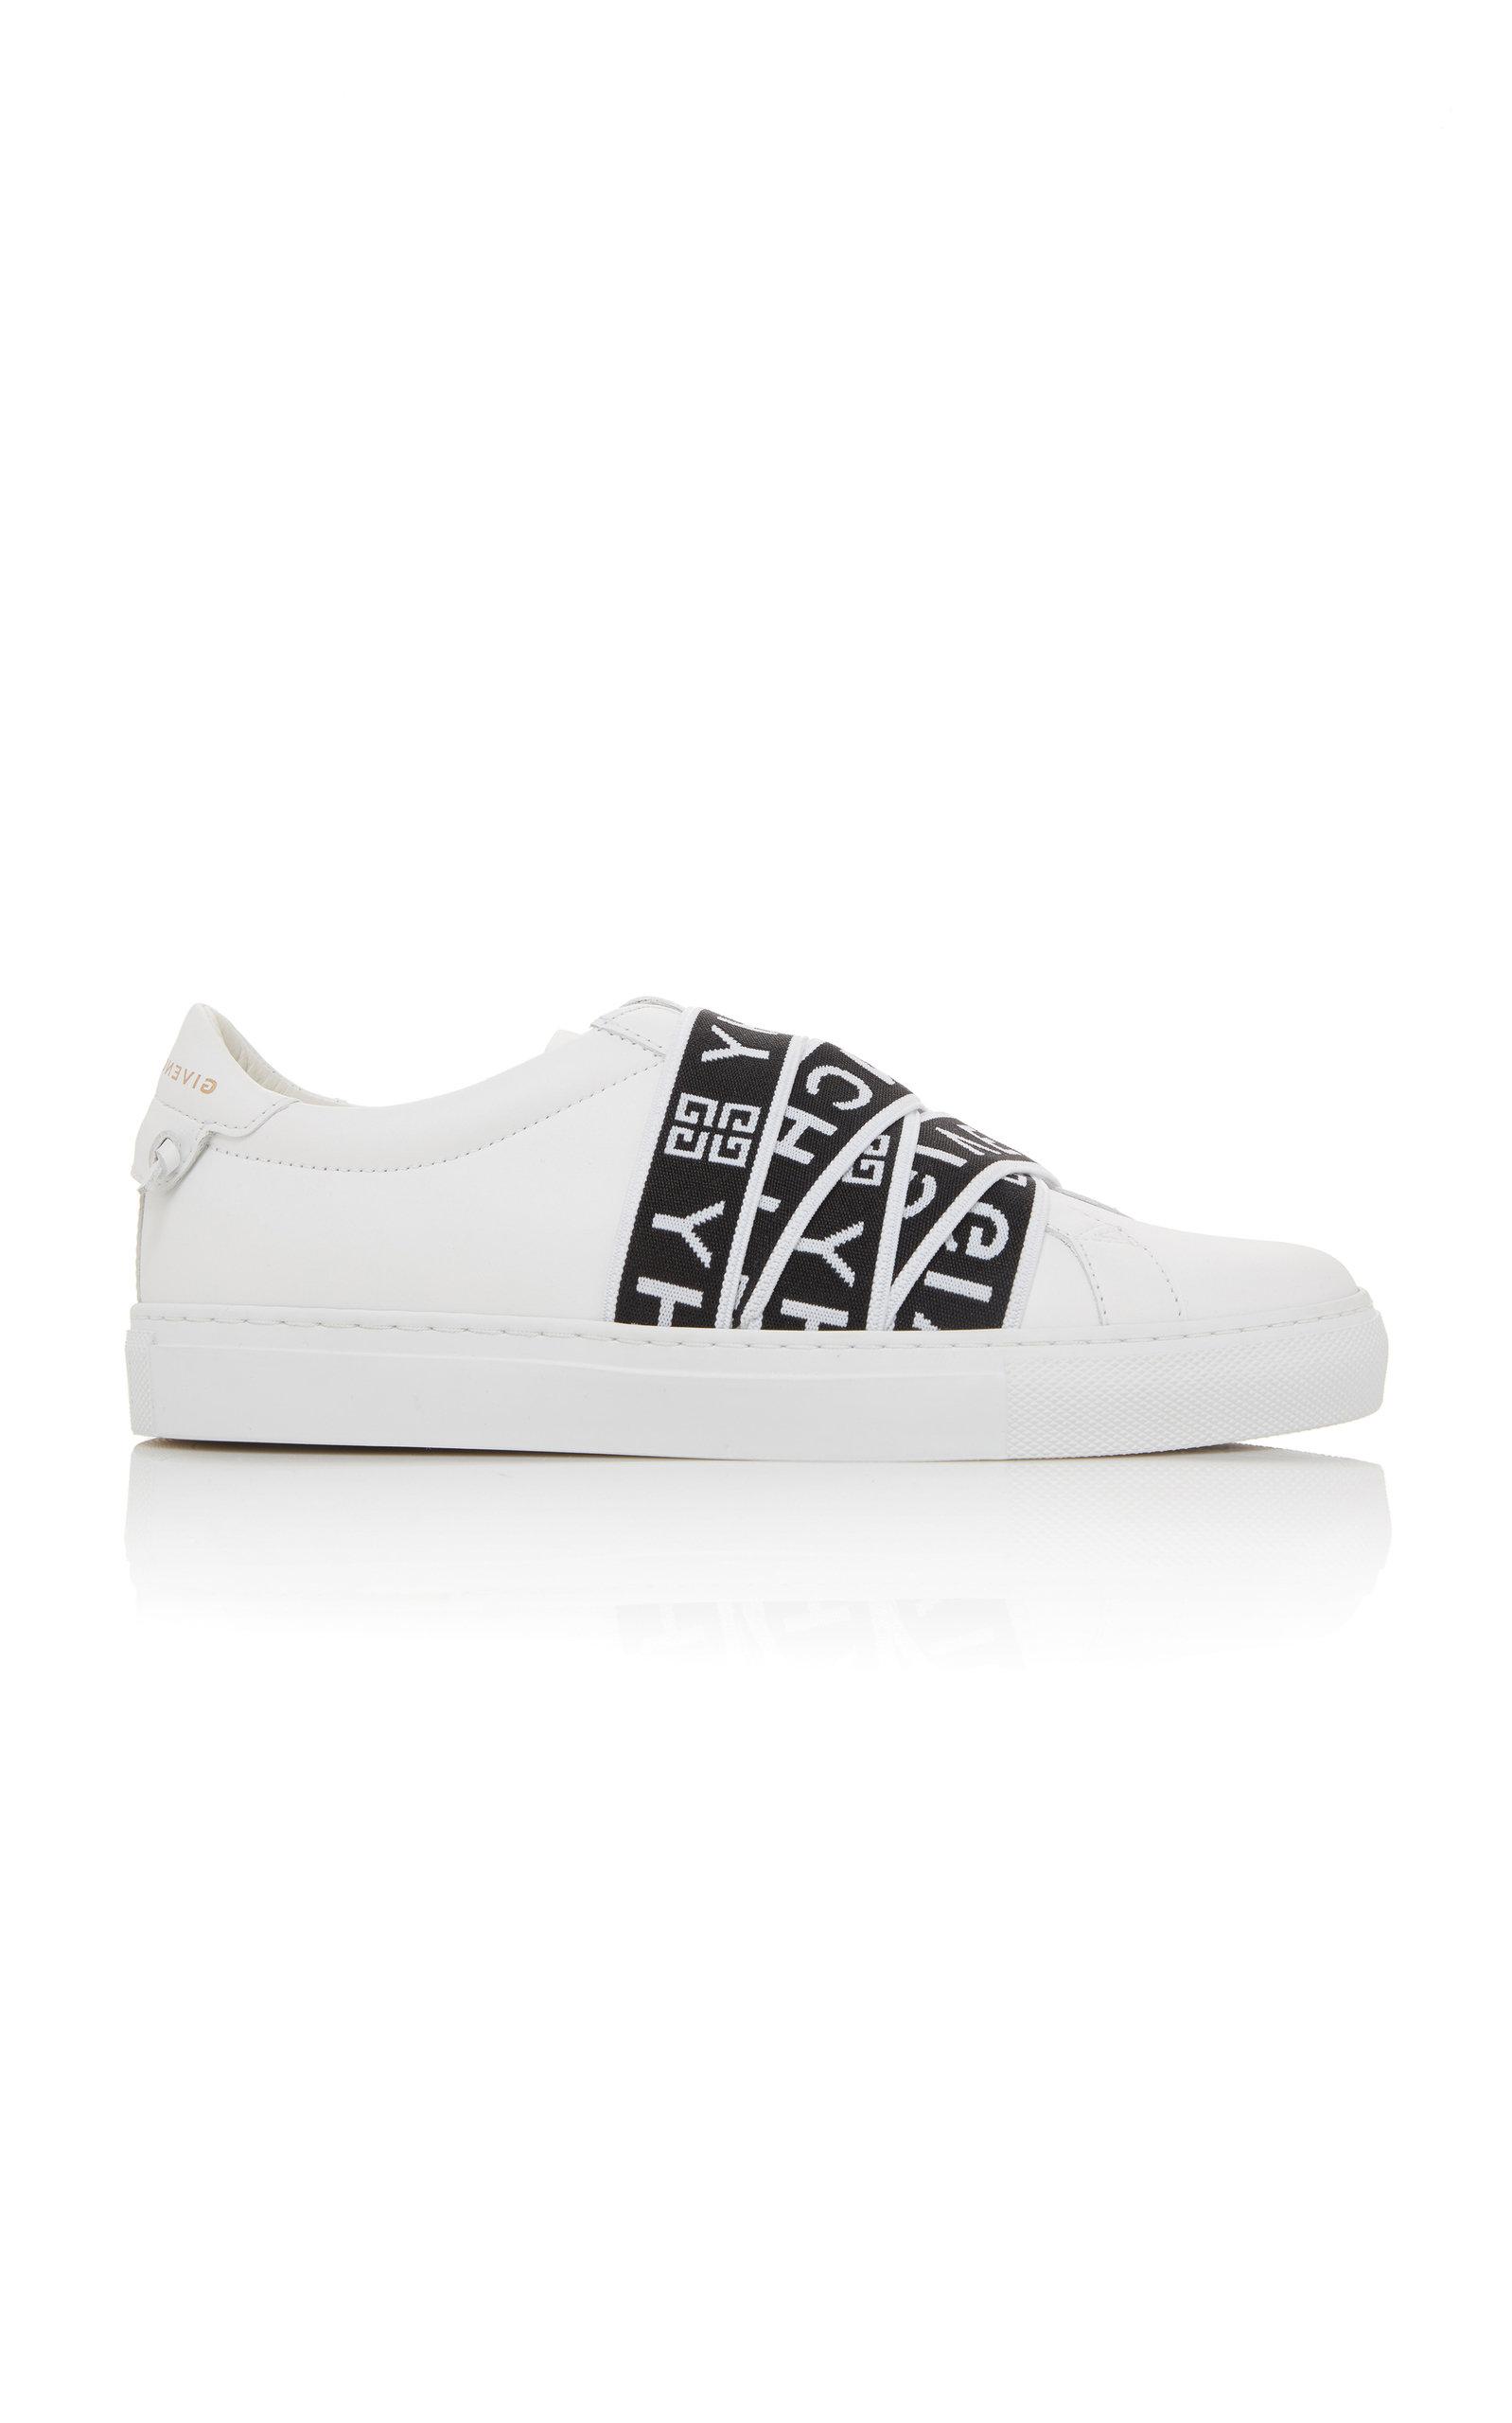 Givenchy 4g Webbing Sneakers Black White | Lyst